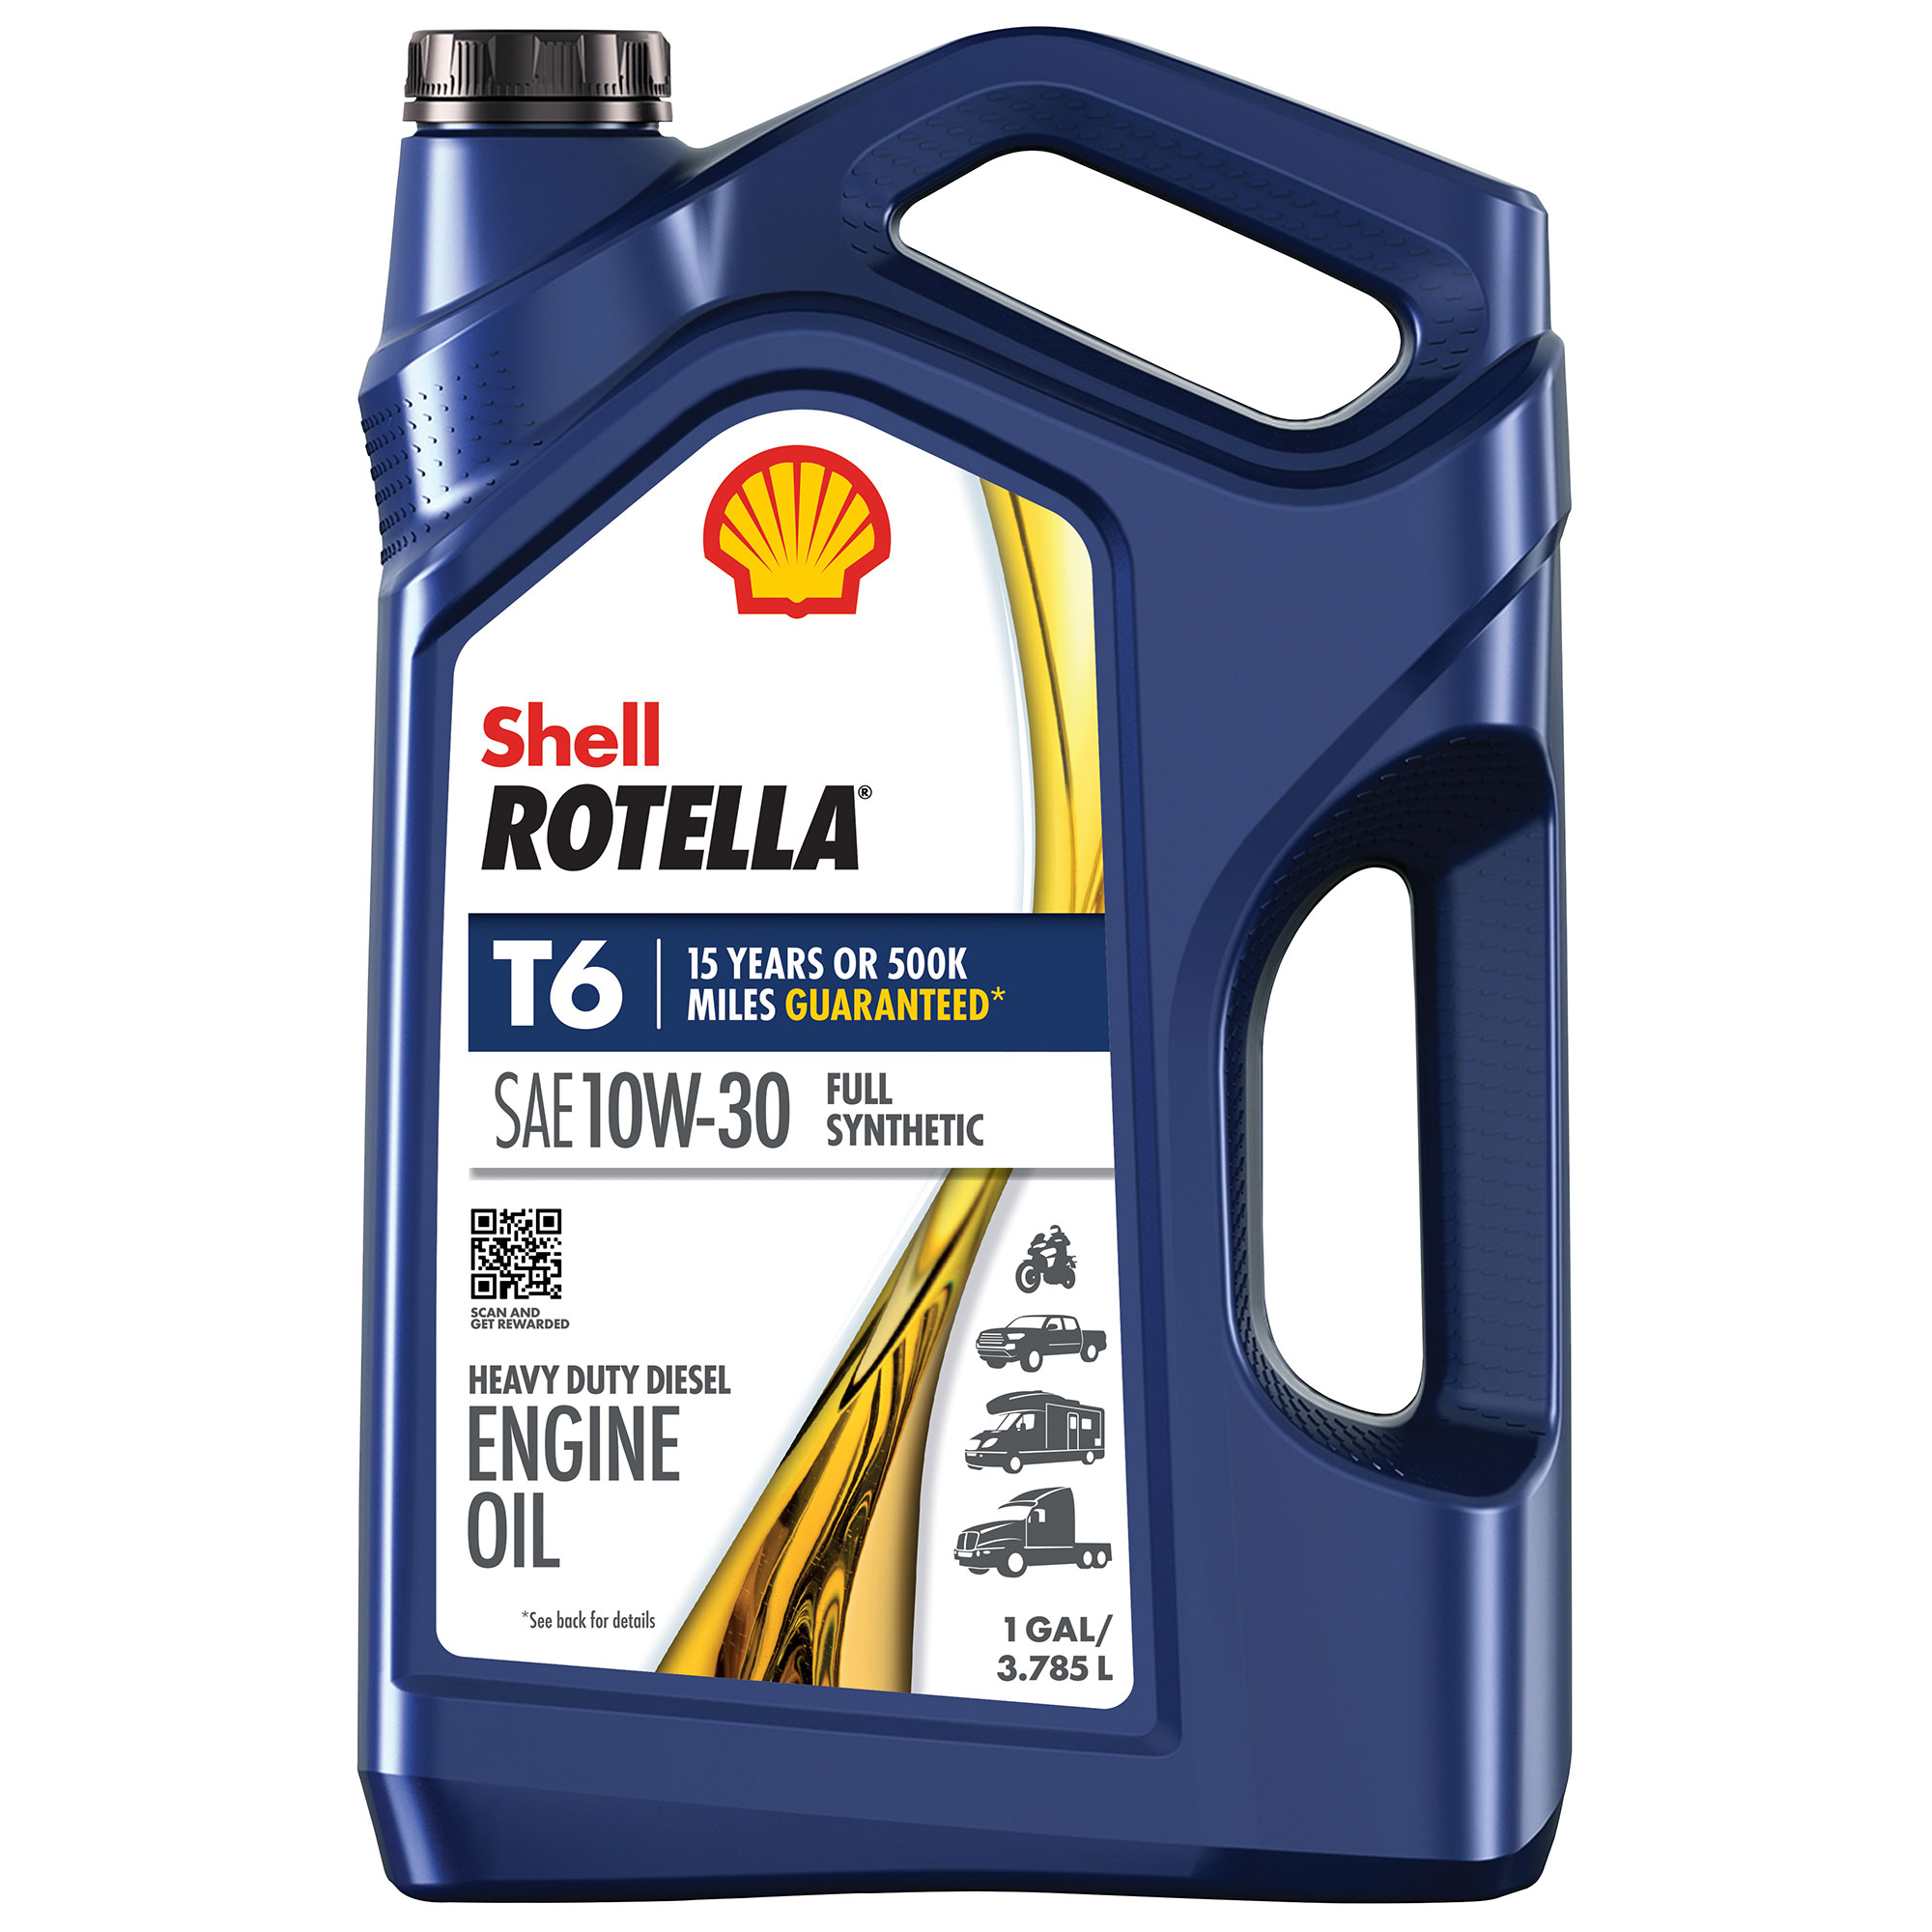 shell-rotella-t6-10w-30-offers-fuel-economy-engine-protection-truck-news